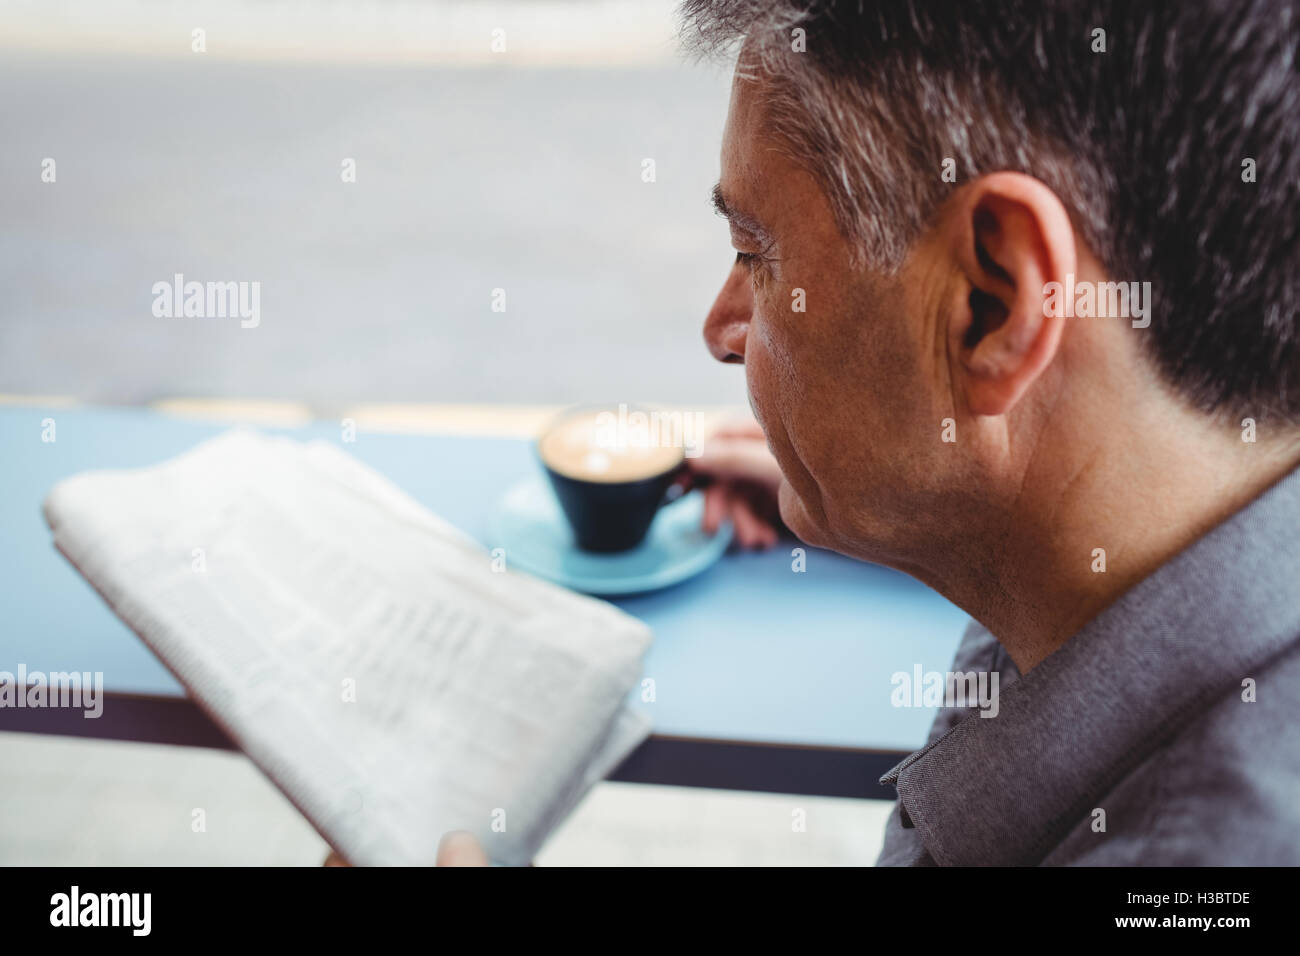 Man reading newspaper et holding Coffee cup Banque D'Images